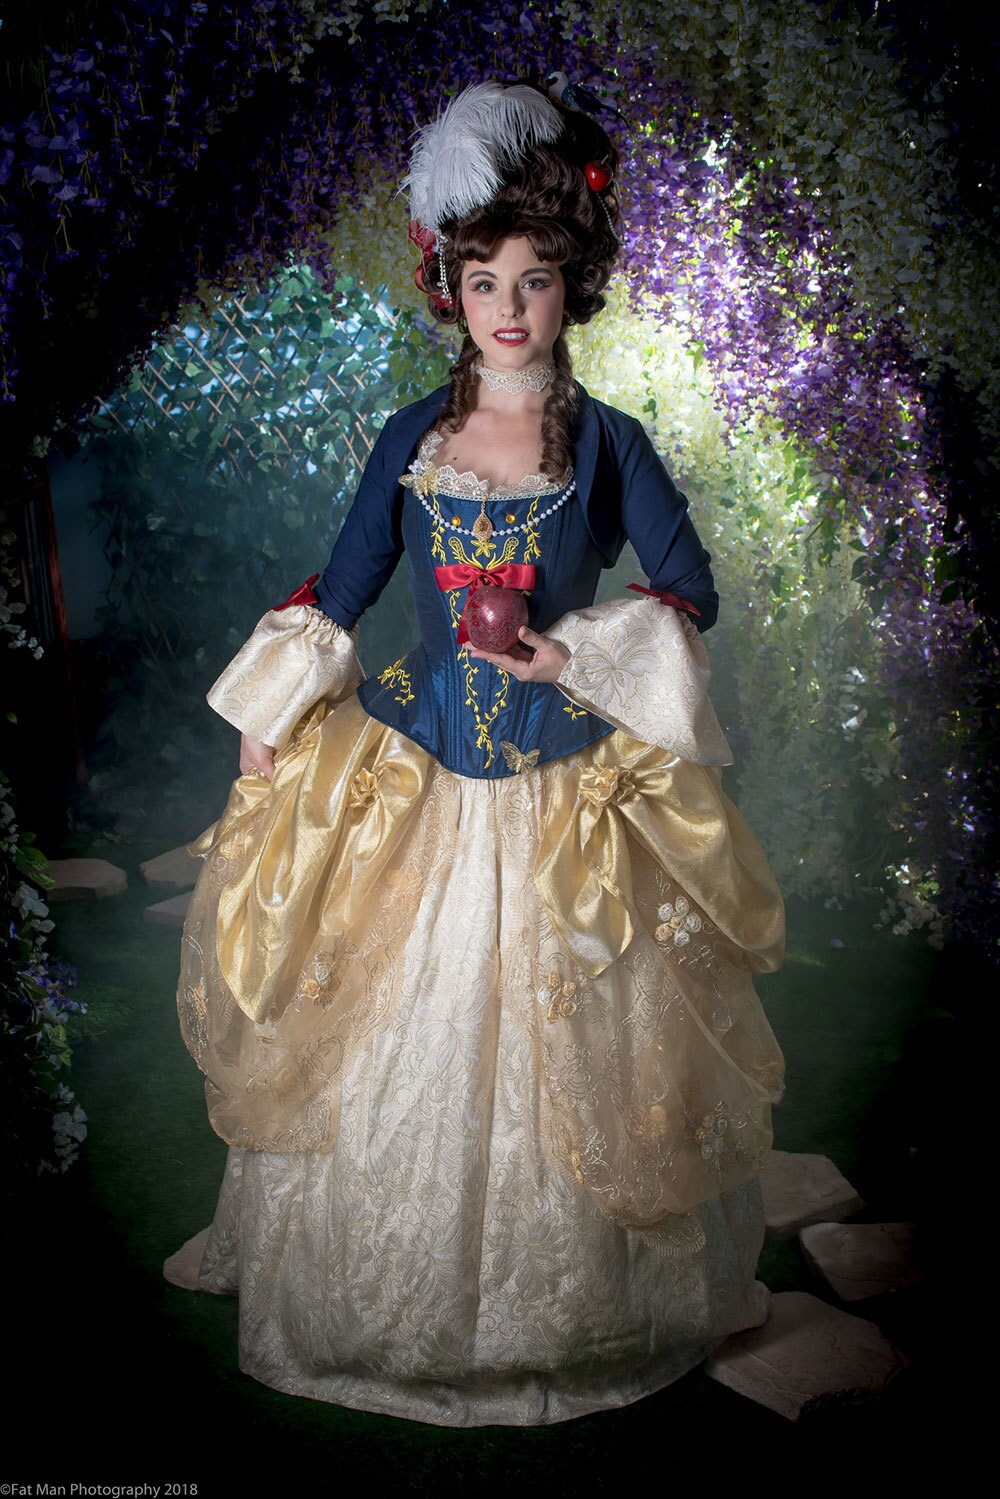 Amber as Snow White in Rococo Princess-Inspired Photoshoot